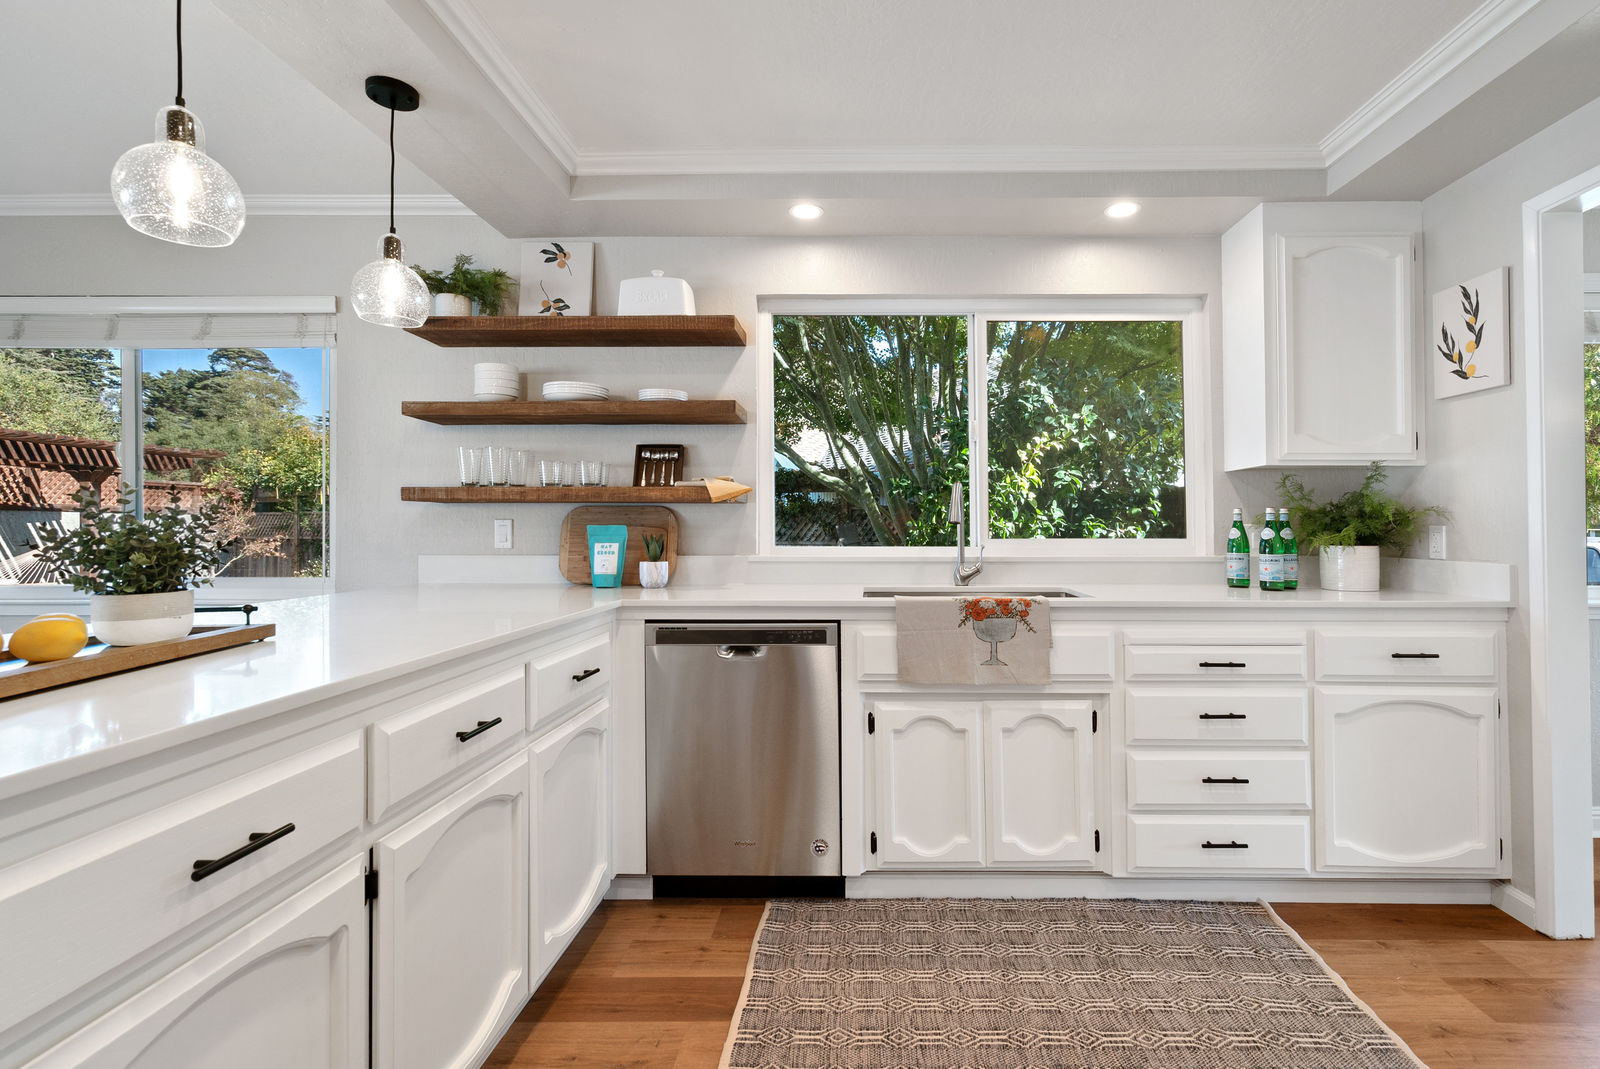 Farmhouse kitchen with white cabinets and countertops